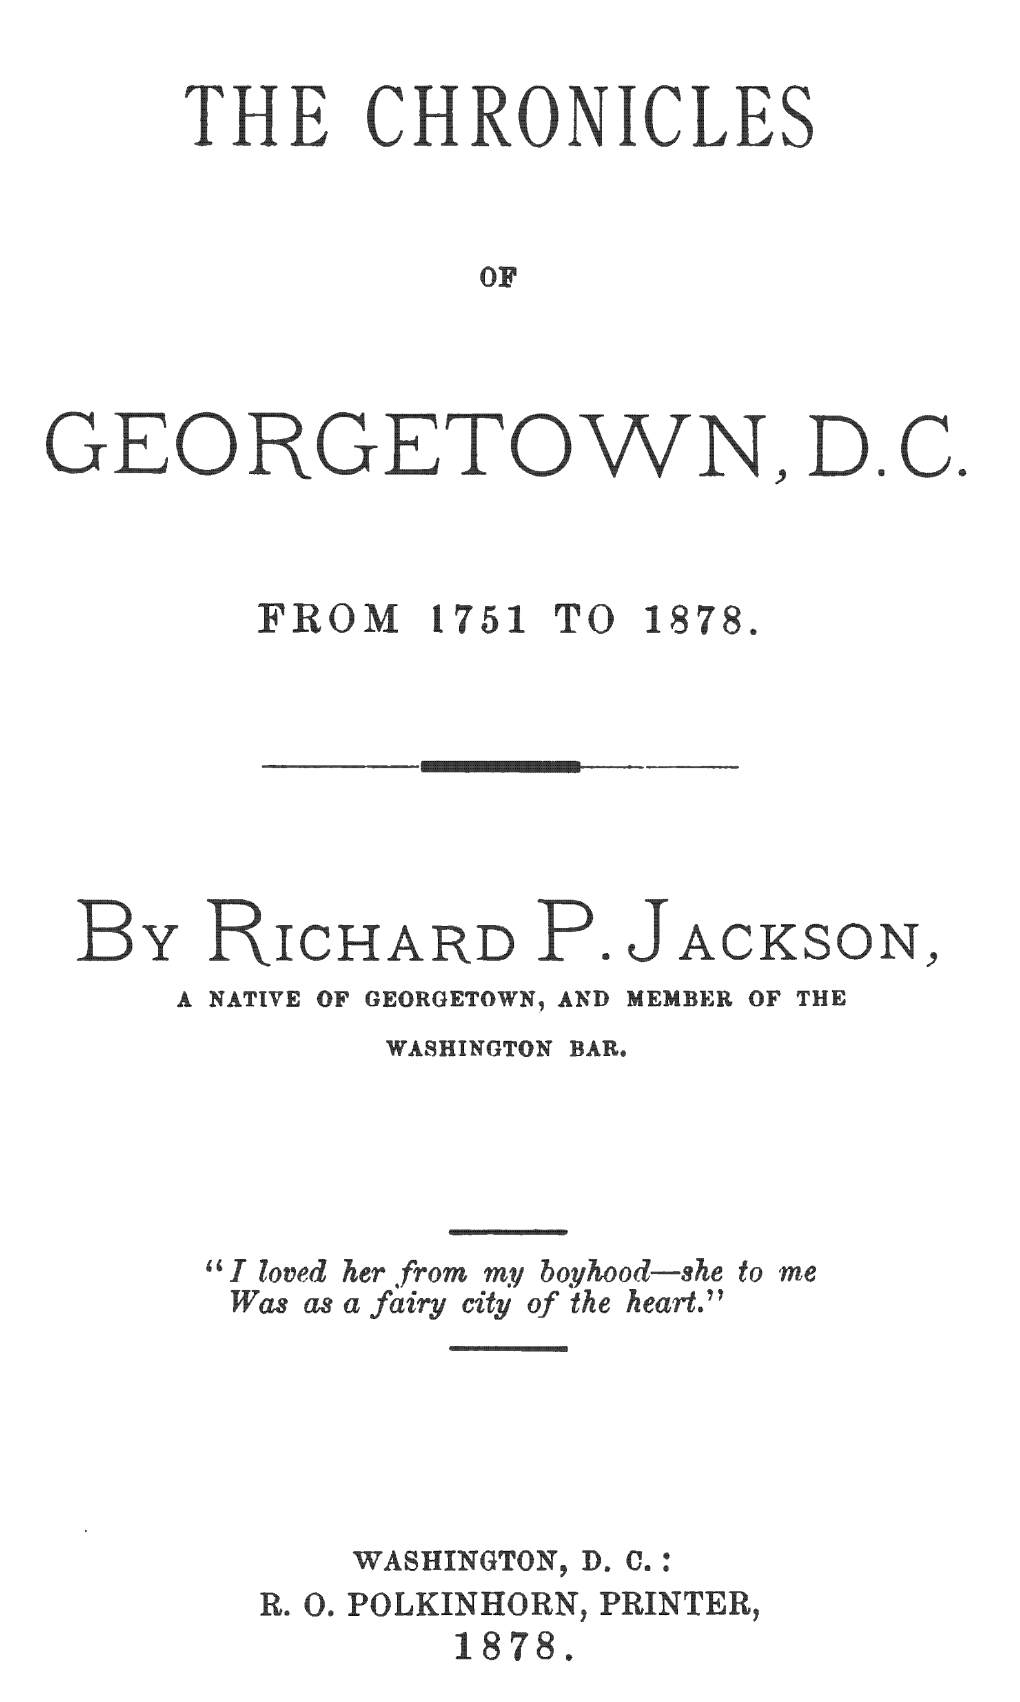 The Chronicles of Georgetown, D.C., from 1751-1878